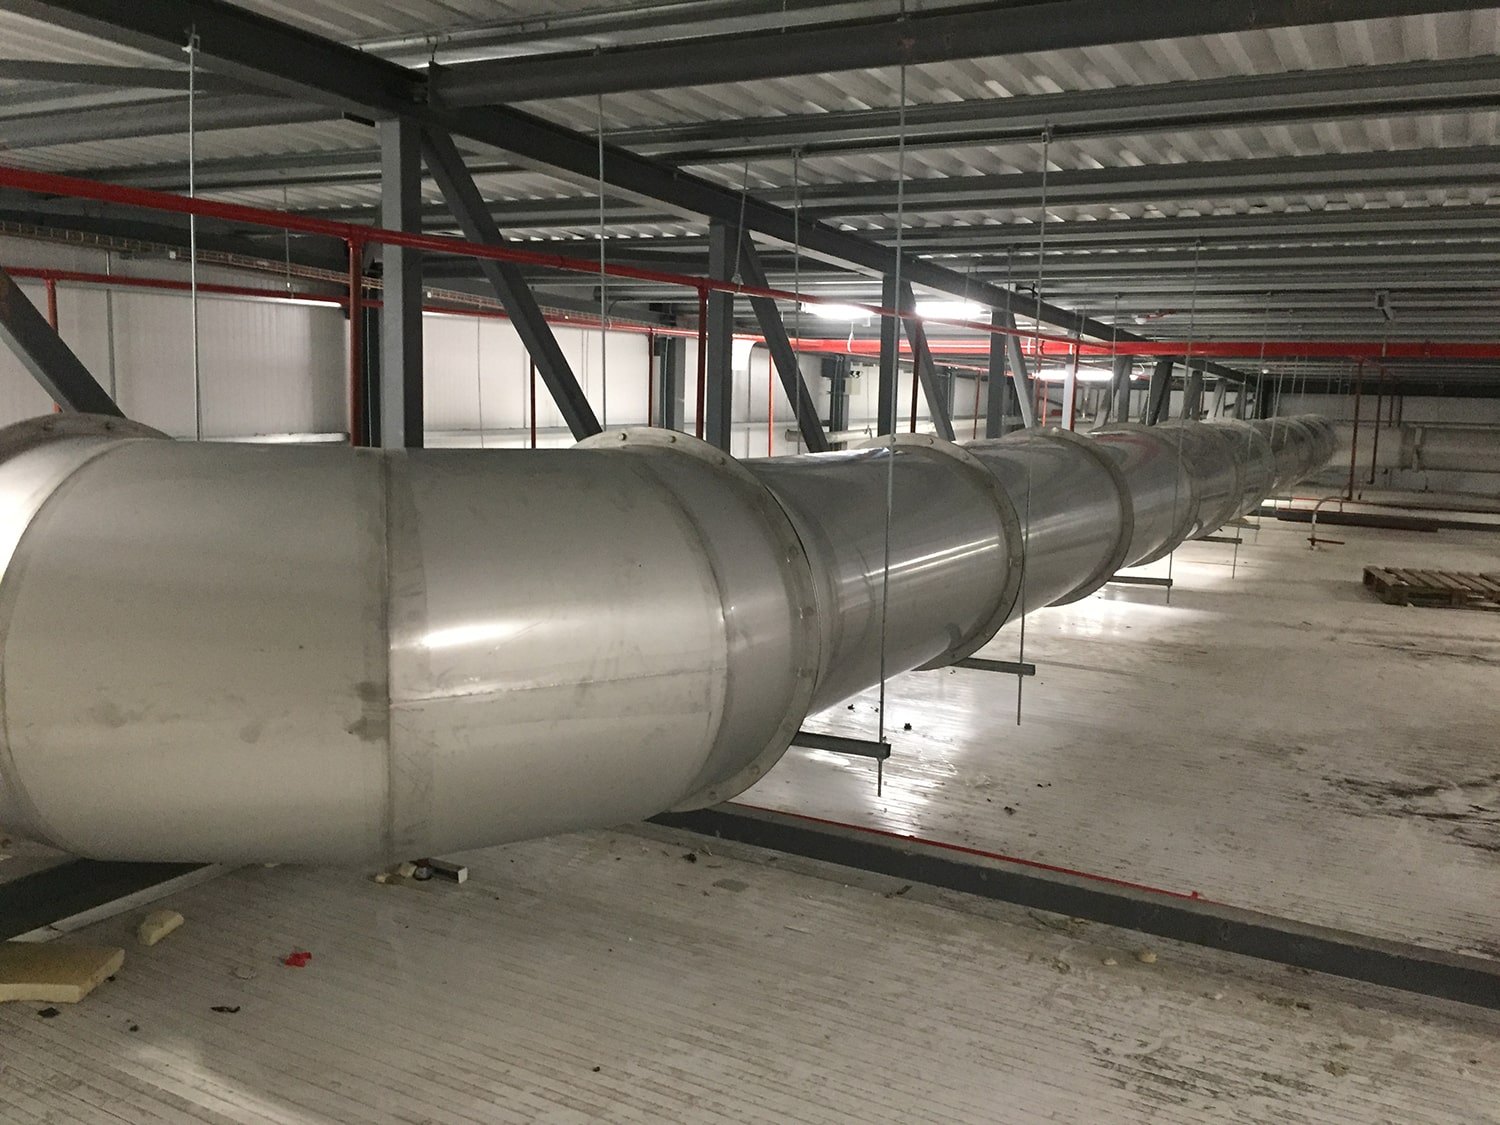 Ducting - SX Engineering - Nutricia air duct